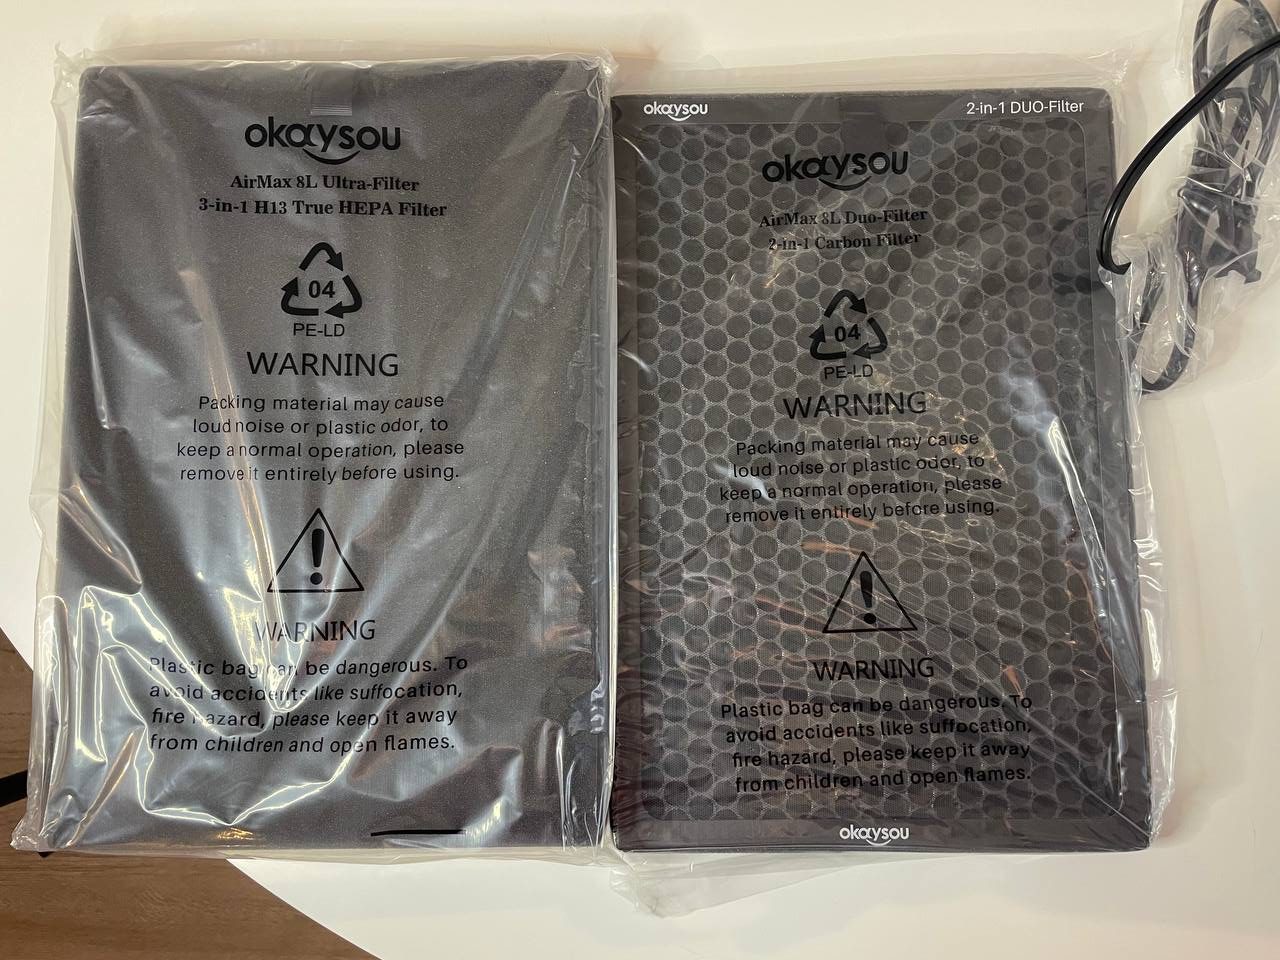 Packaged filters that came with Okaysou Air Purifier